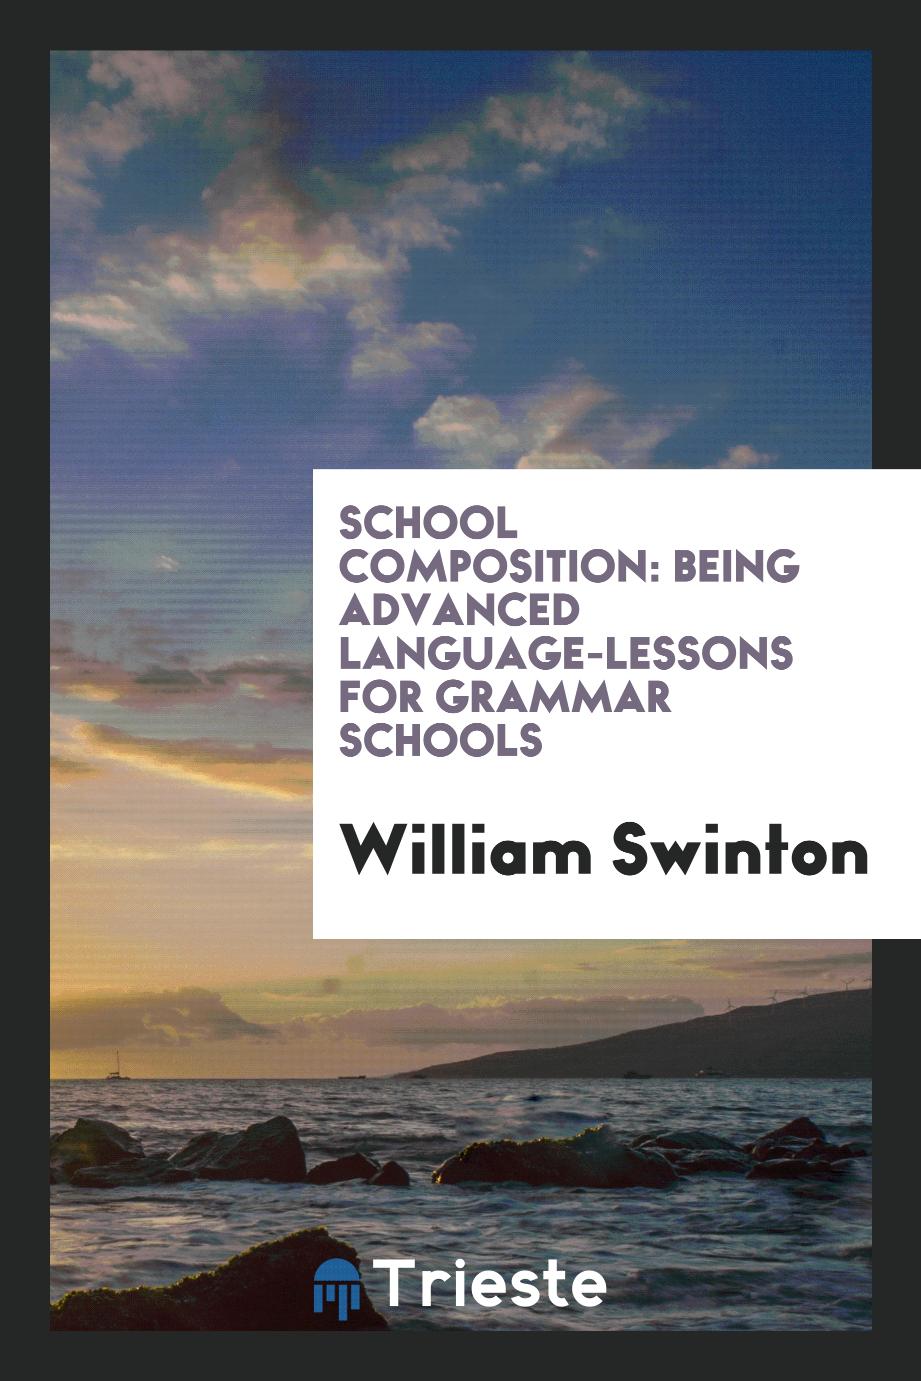 School Composition: Being Advanced Language-Lessons for Grammar Schools